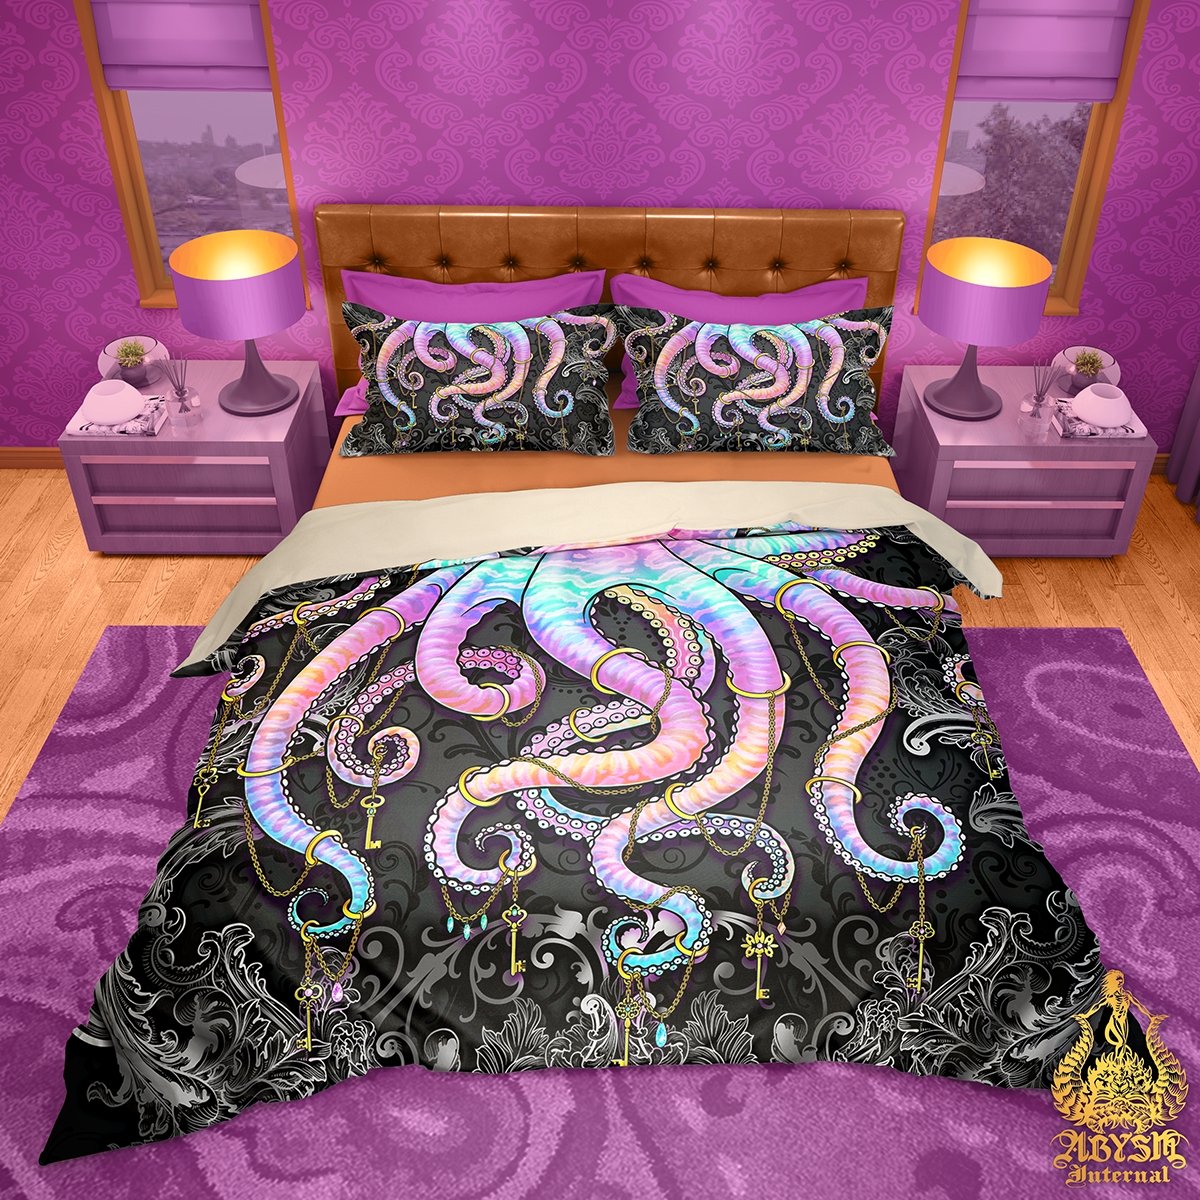 Tentacles Bedding Set, Comforter and Duvet, Beach Bed Cover, Kawaii Gamer Bedroom Decor, King, Queen and Twin Size - Pastel Punk and Black Octopus - Abysm Internal